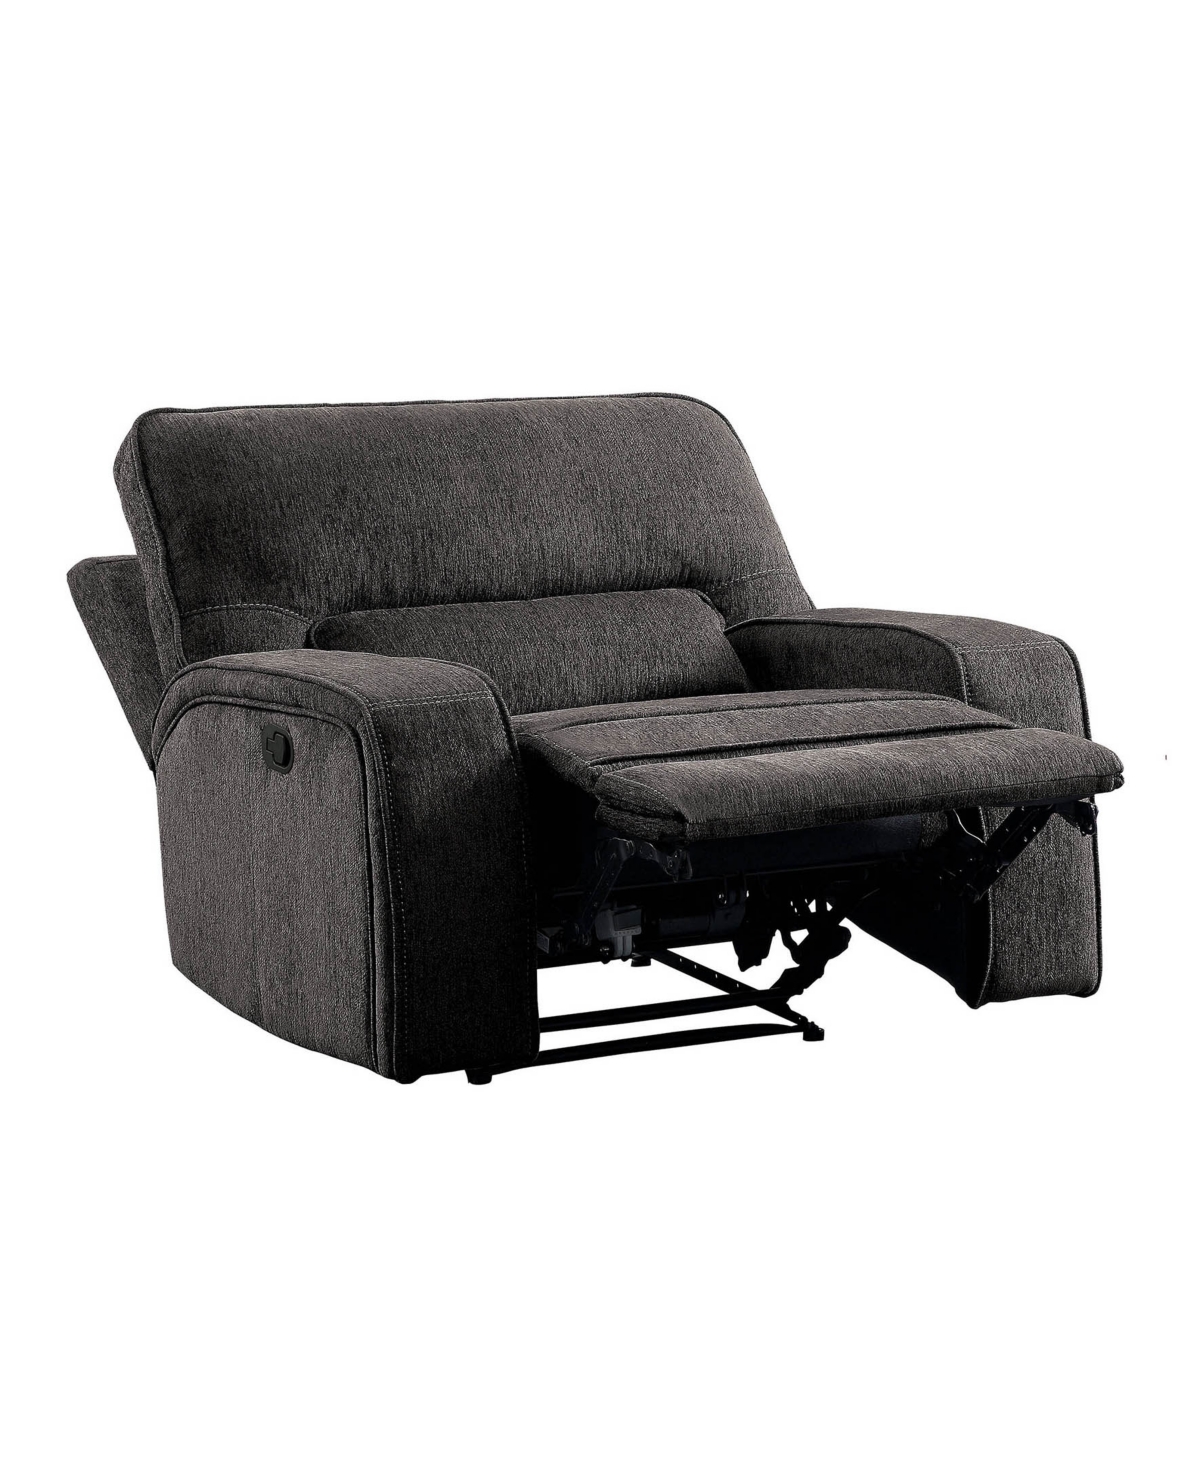 Elevated Recliner